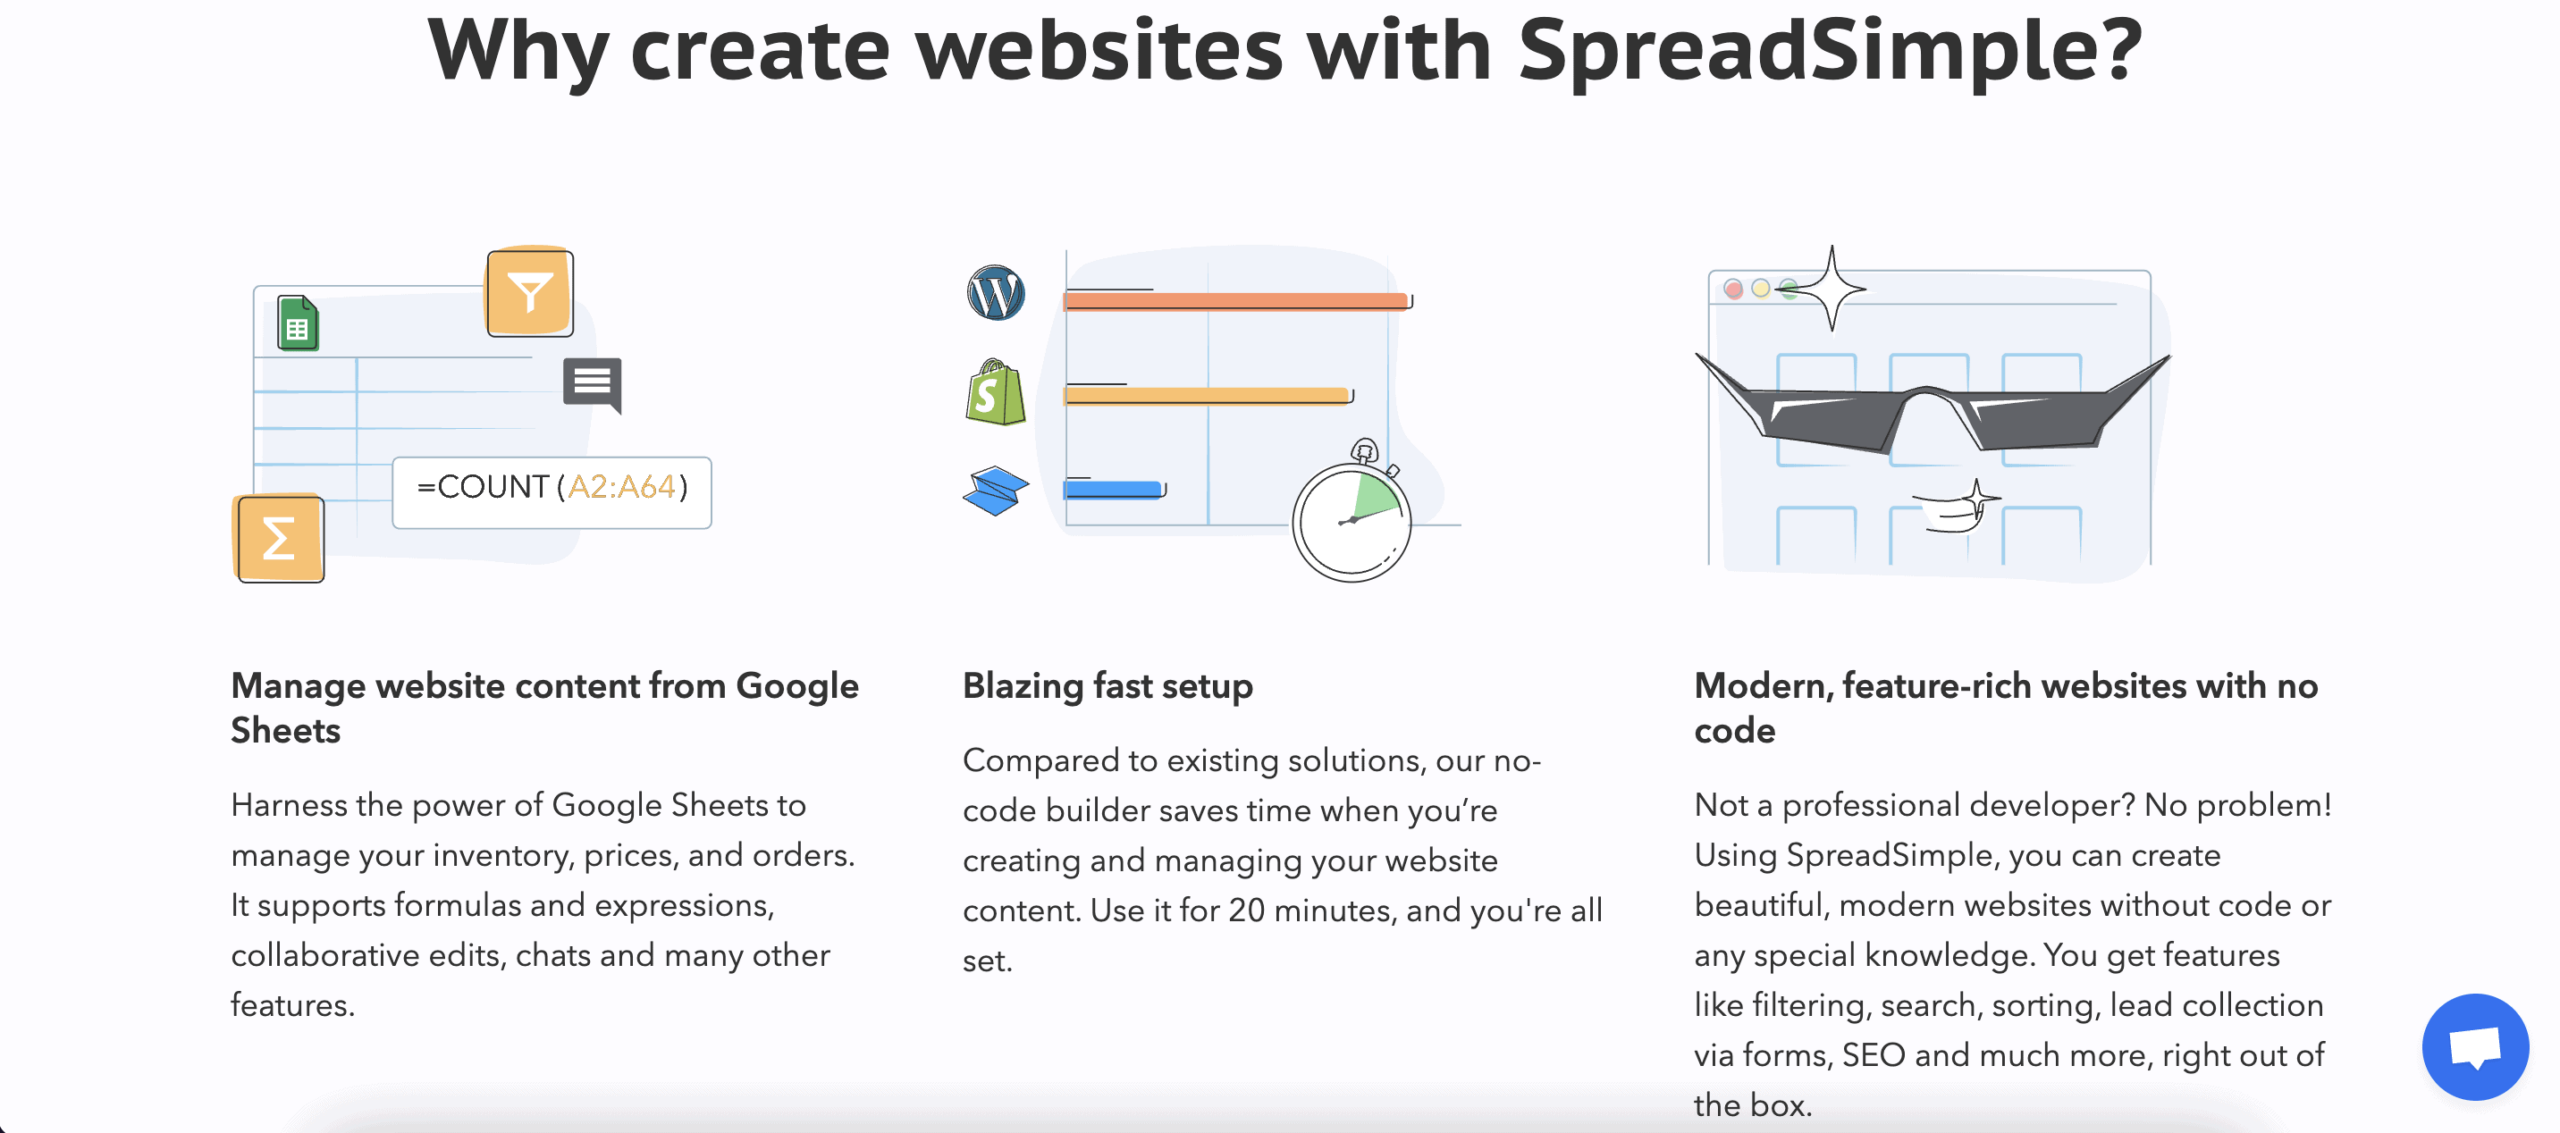 Why use SpreadSimple